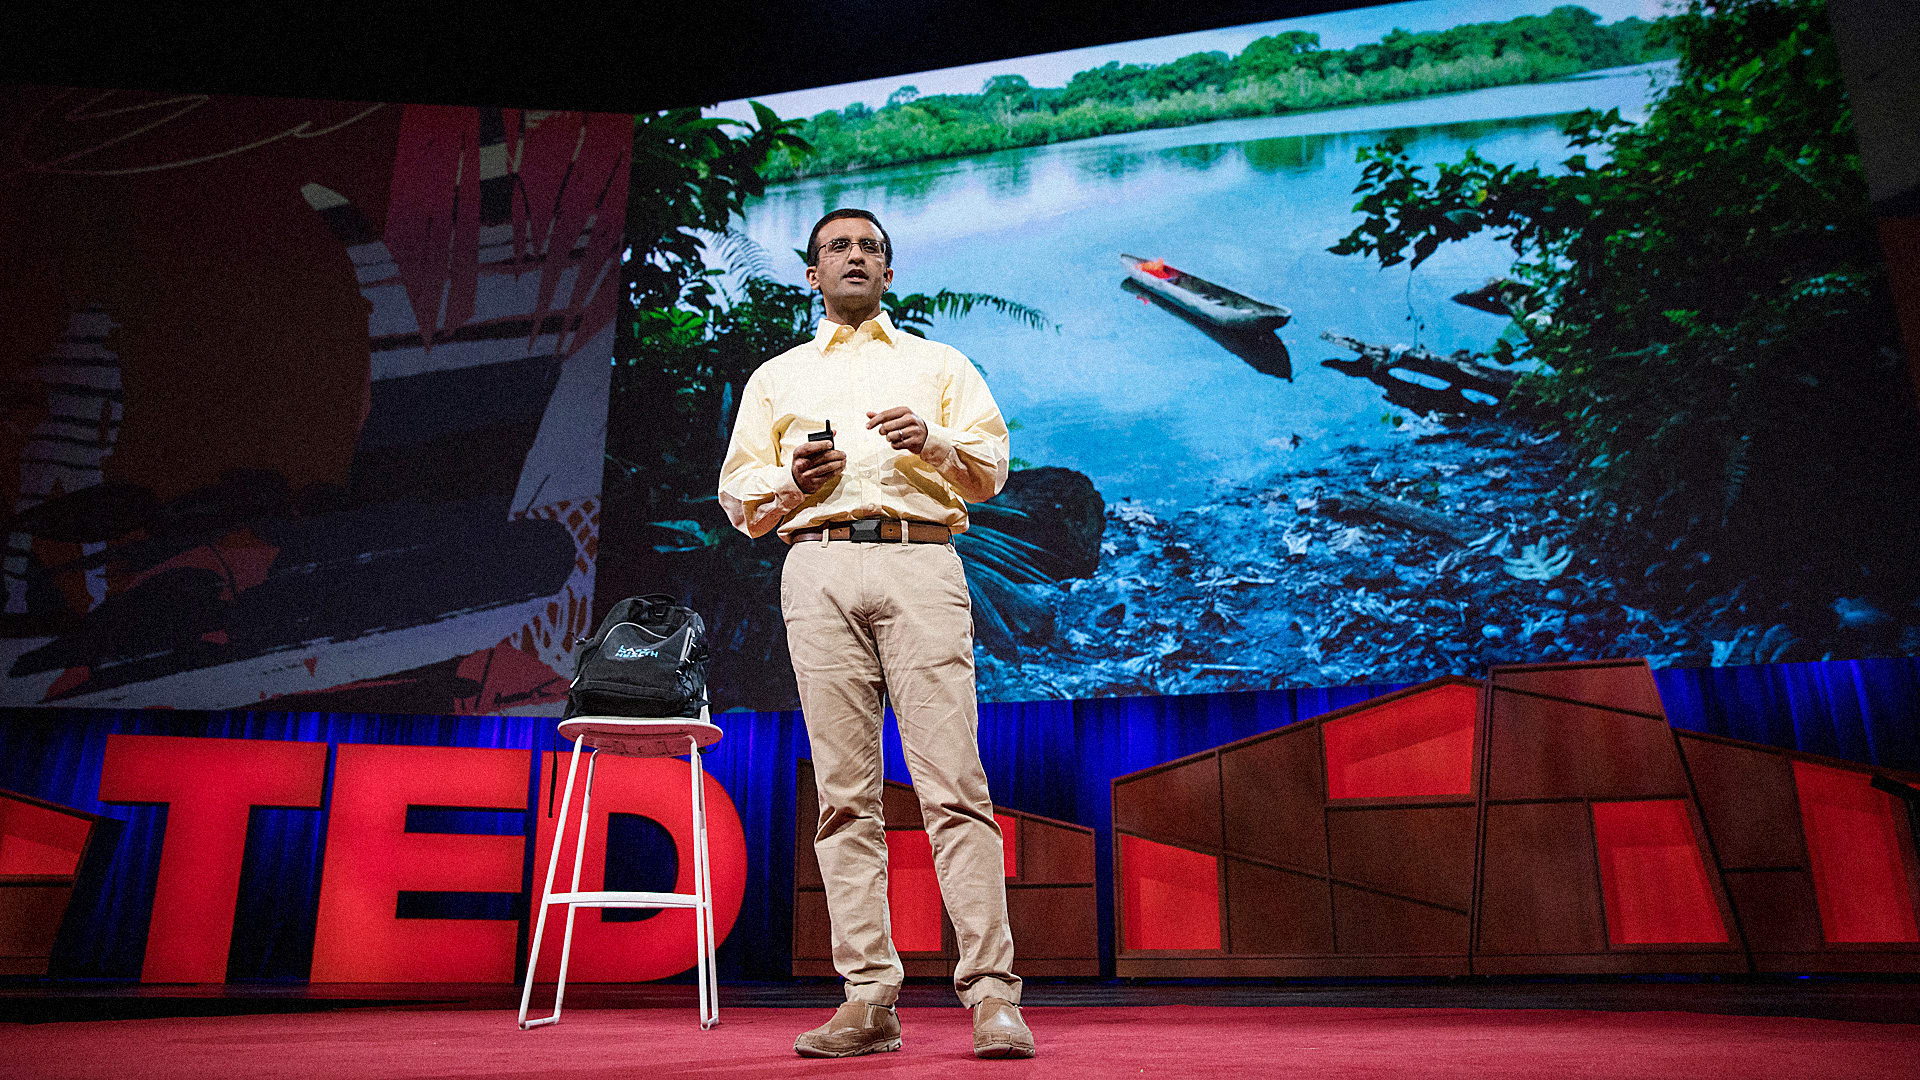 The Winner Of The $1 Million TED Prize Is Bringing Health Care To The World’s Most Remote Communities